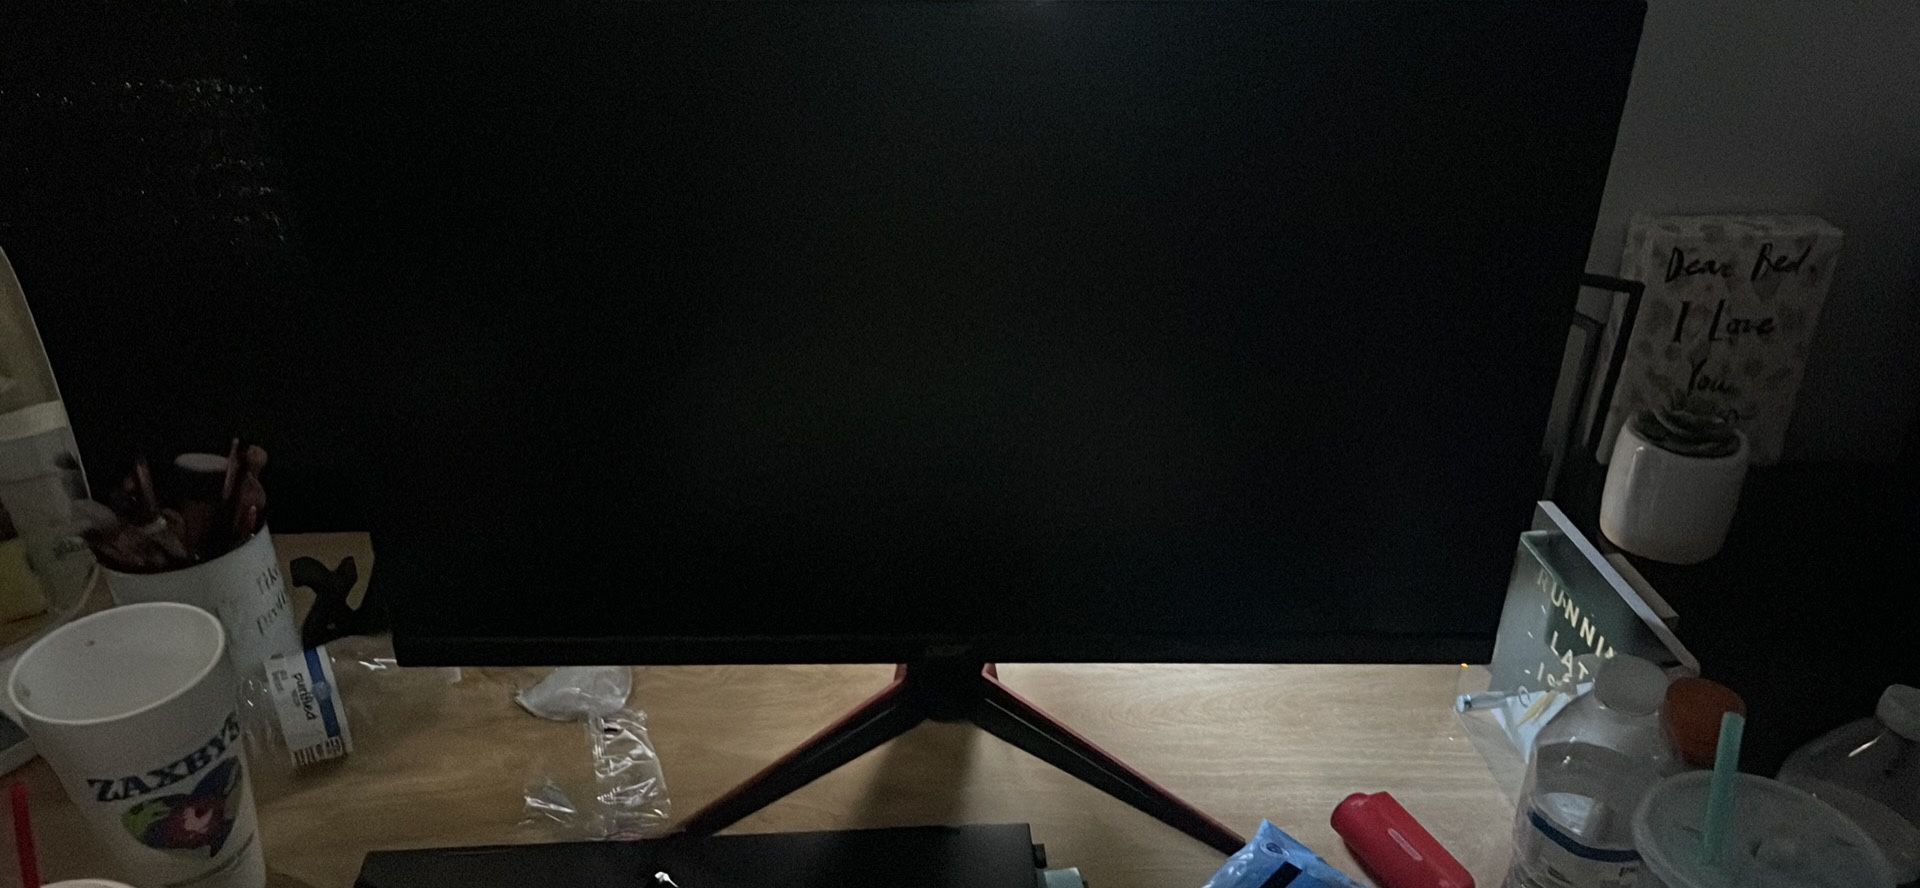 Acer Gaming Monitor 240hz 27inch